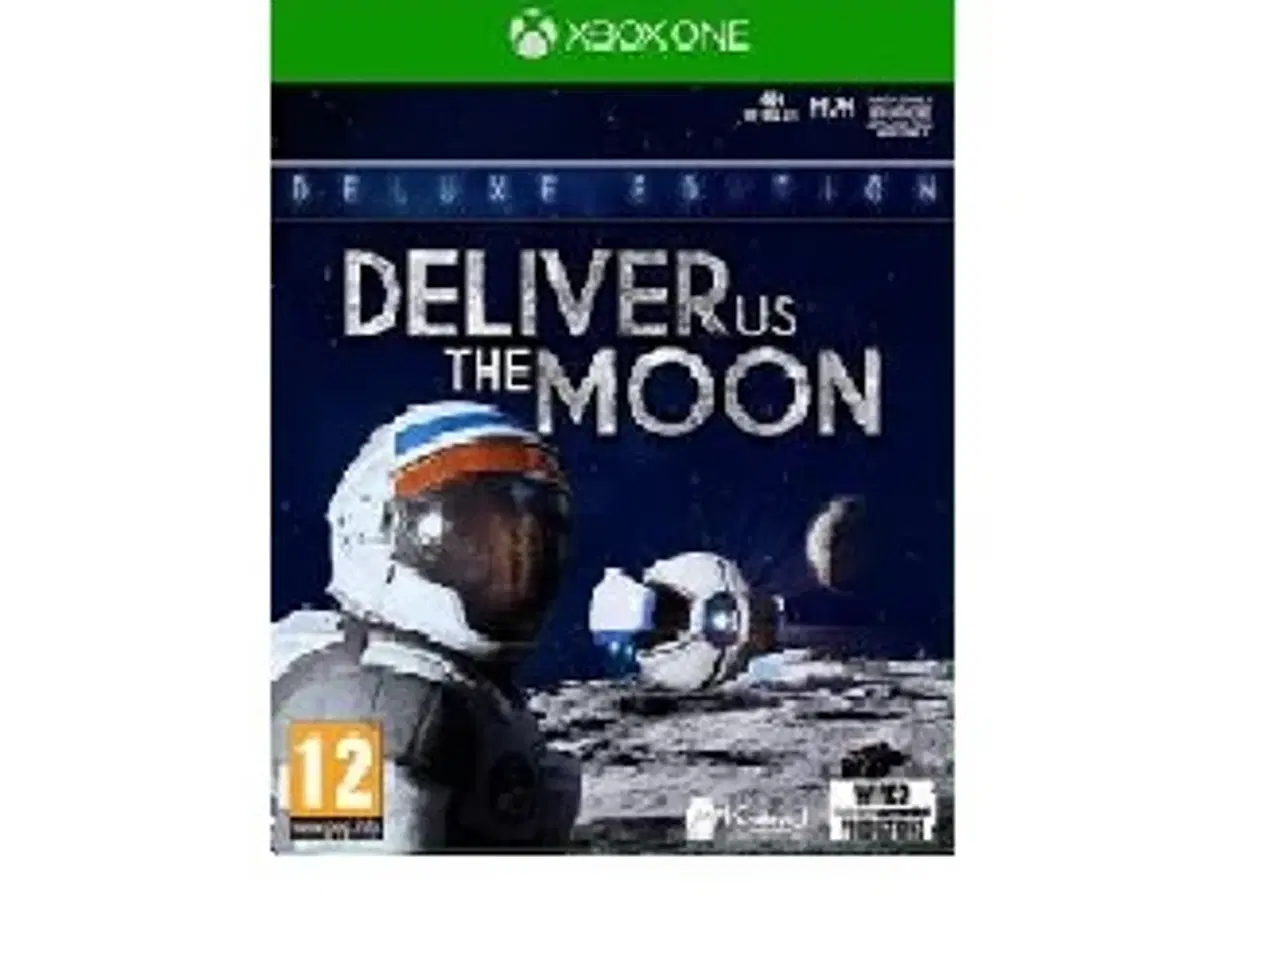 Billede 1 - Deliver Us The Moon Deluxe Edition